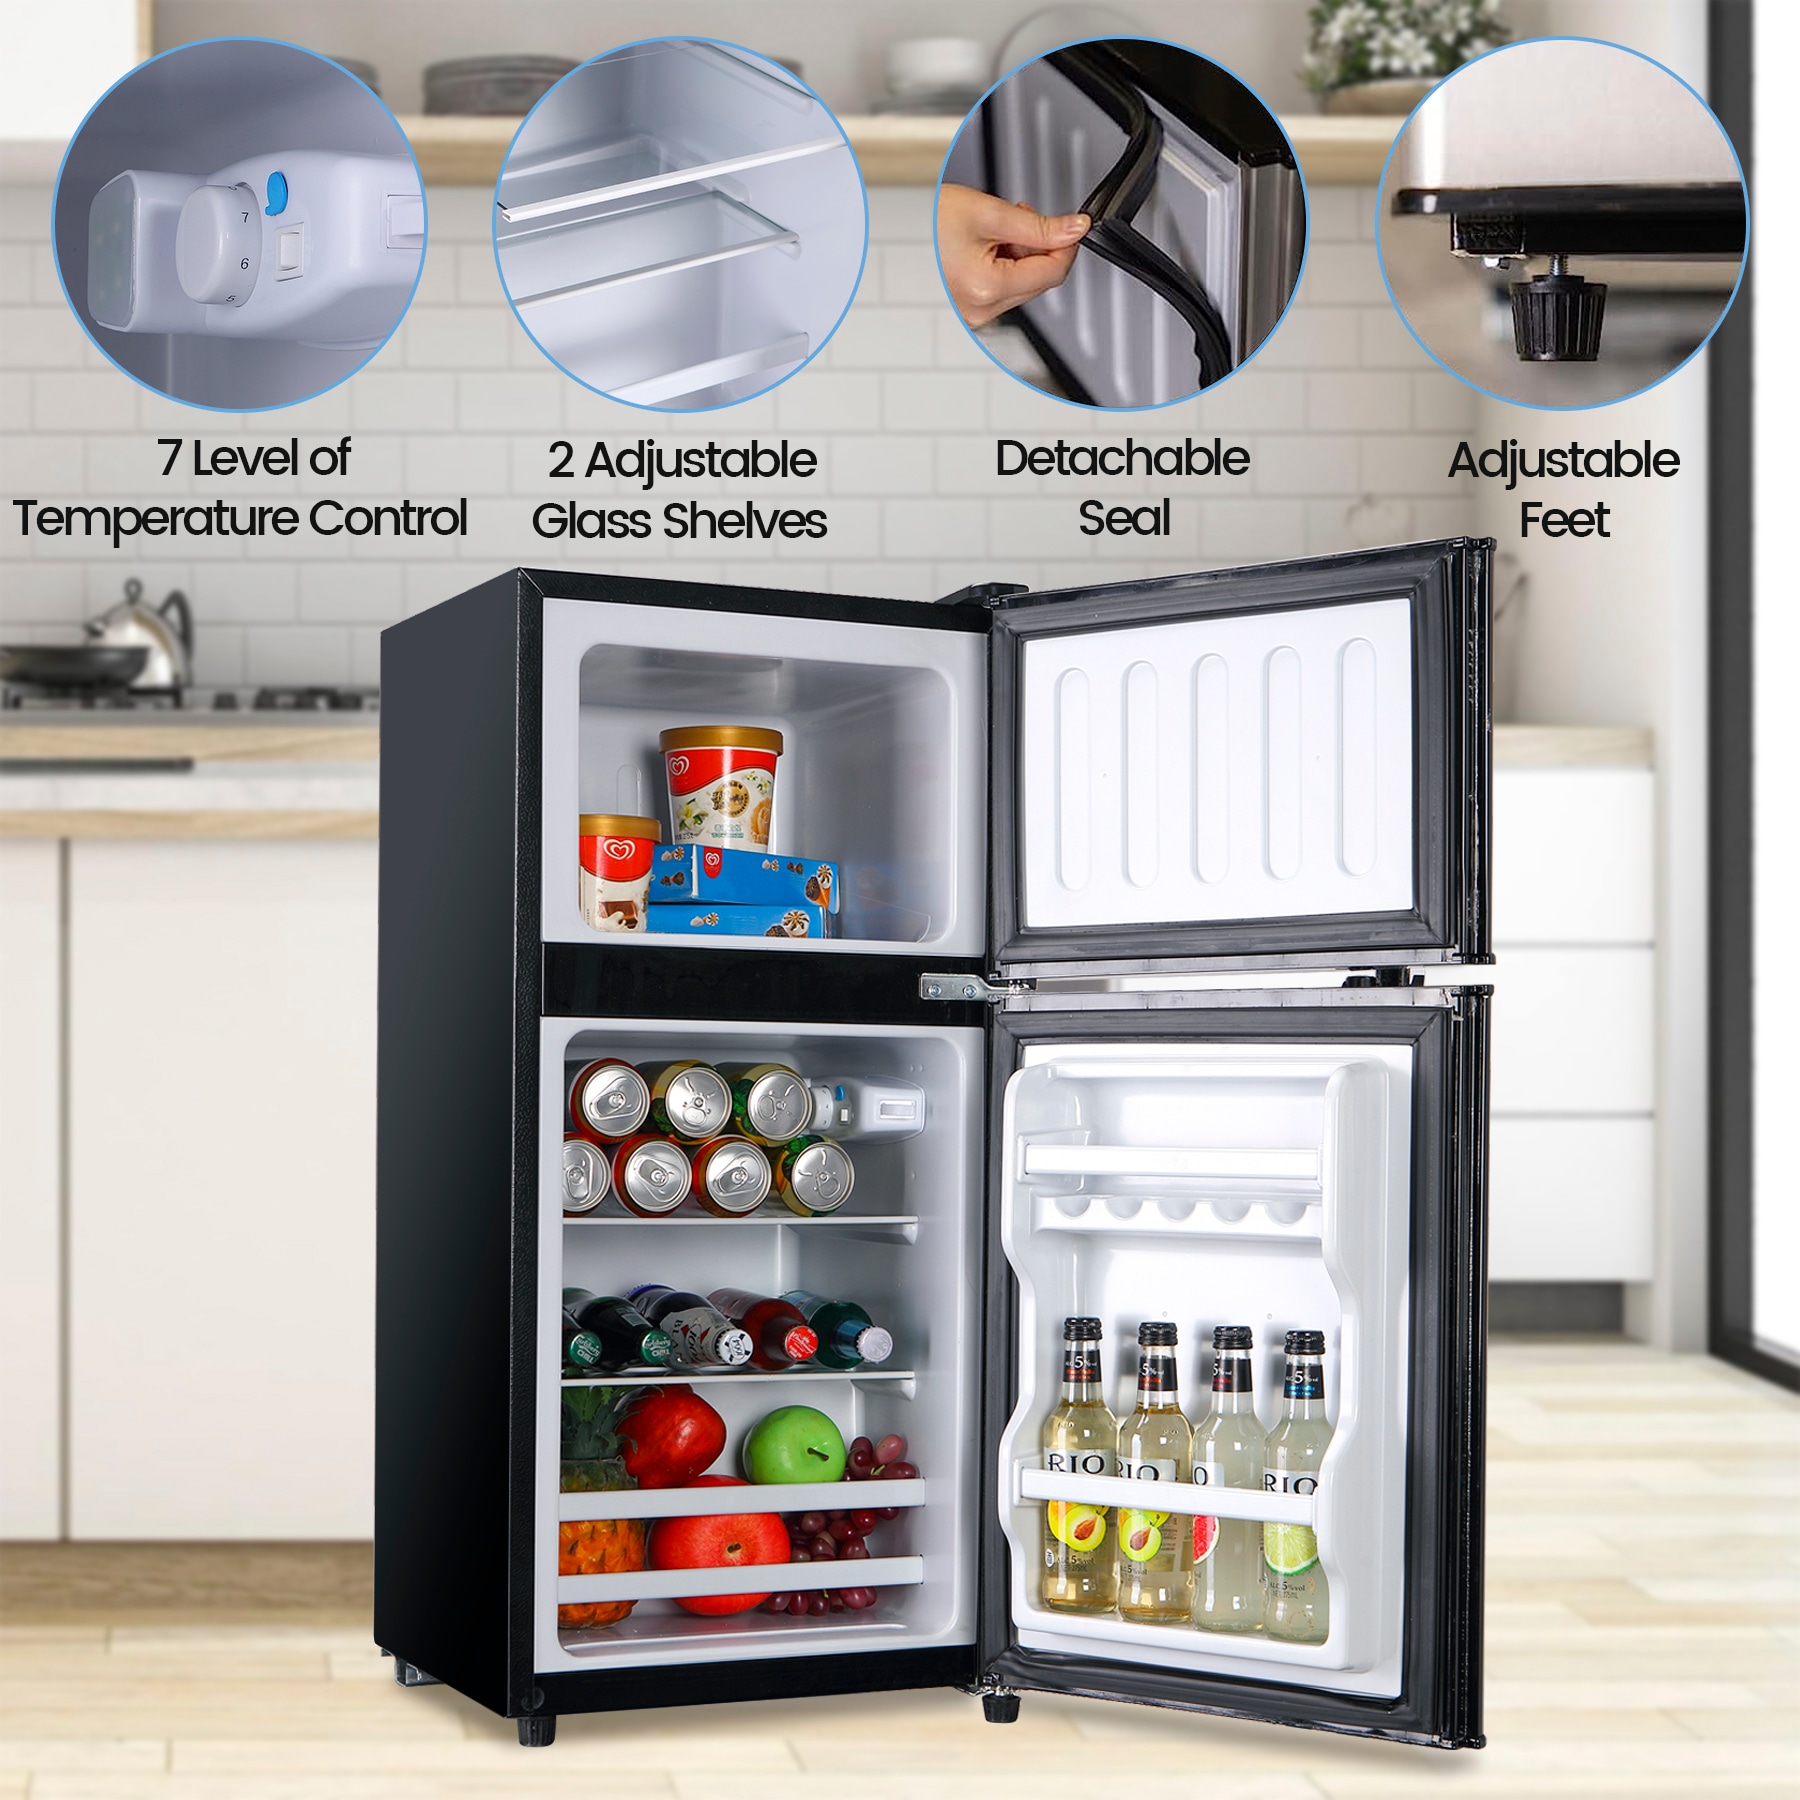  Fcicarn 3.5 Cu. Ft. Compact Refrigerator, Featuring a Separate  Freezer Compartment, Lock, 7-Level Thermostat and Vintage-Inspired Styling  for Small Kitchens, Home Offices or Dorm Rooms, Black : Appliances